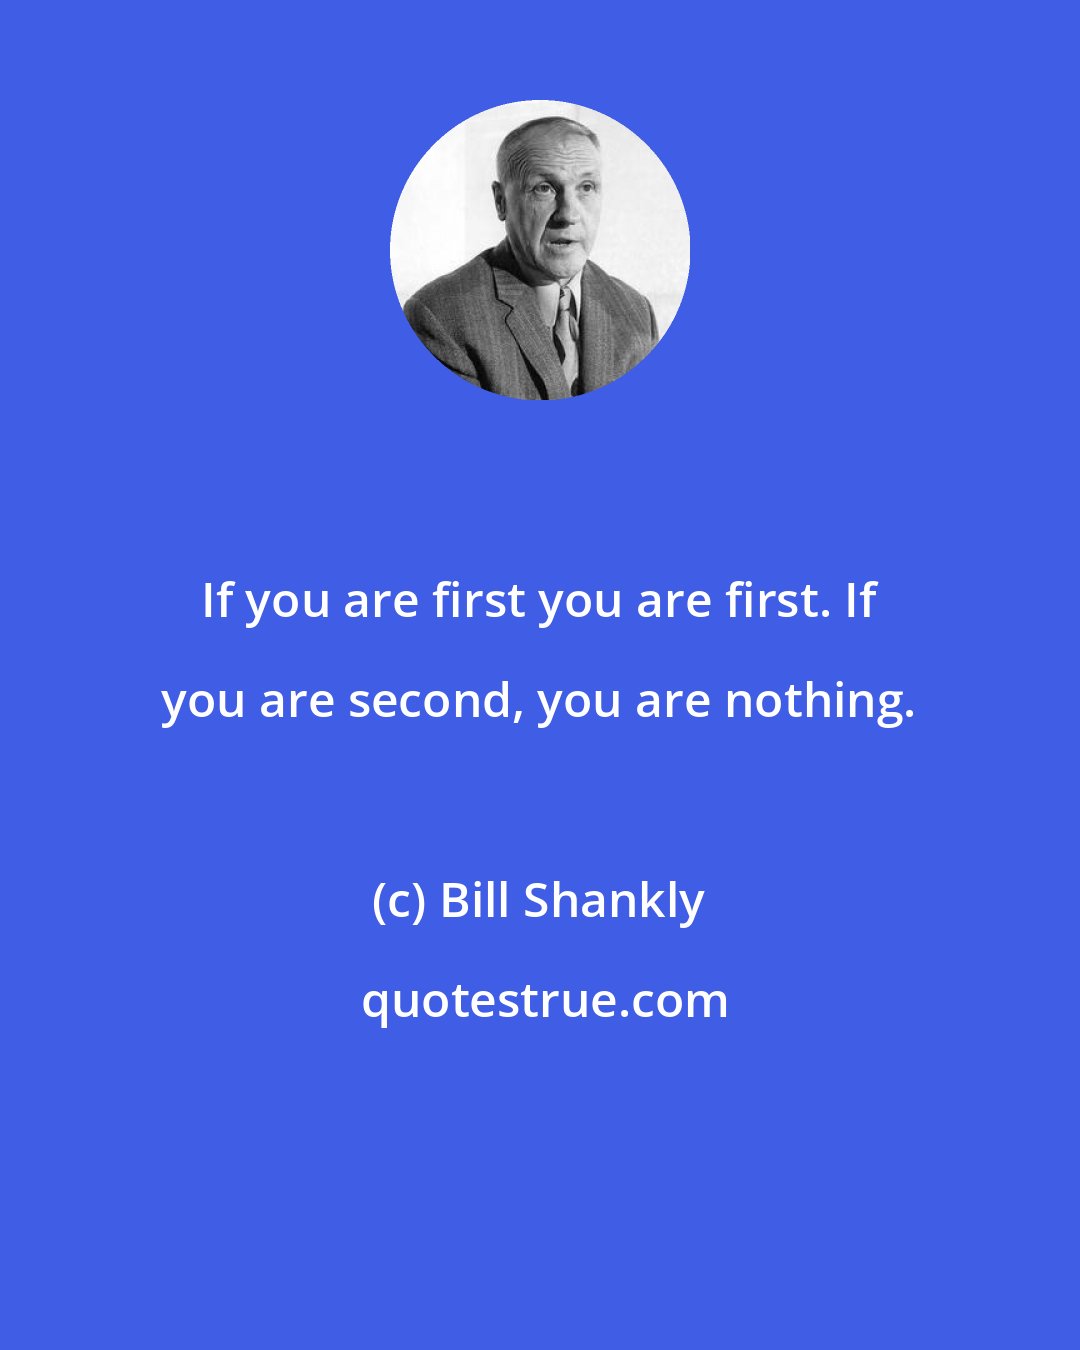 Bill Shankly: If you are first you are first. If you are second, you are nothing.